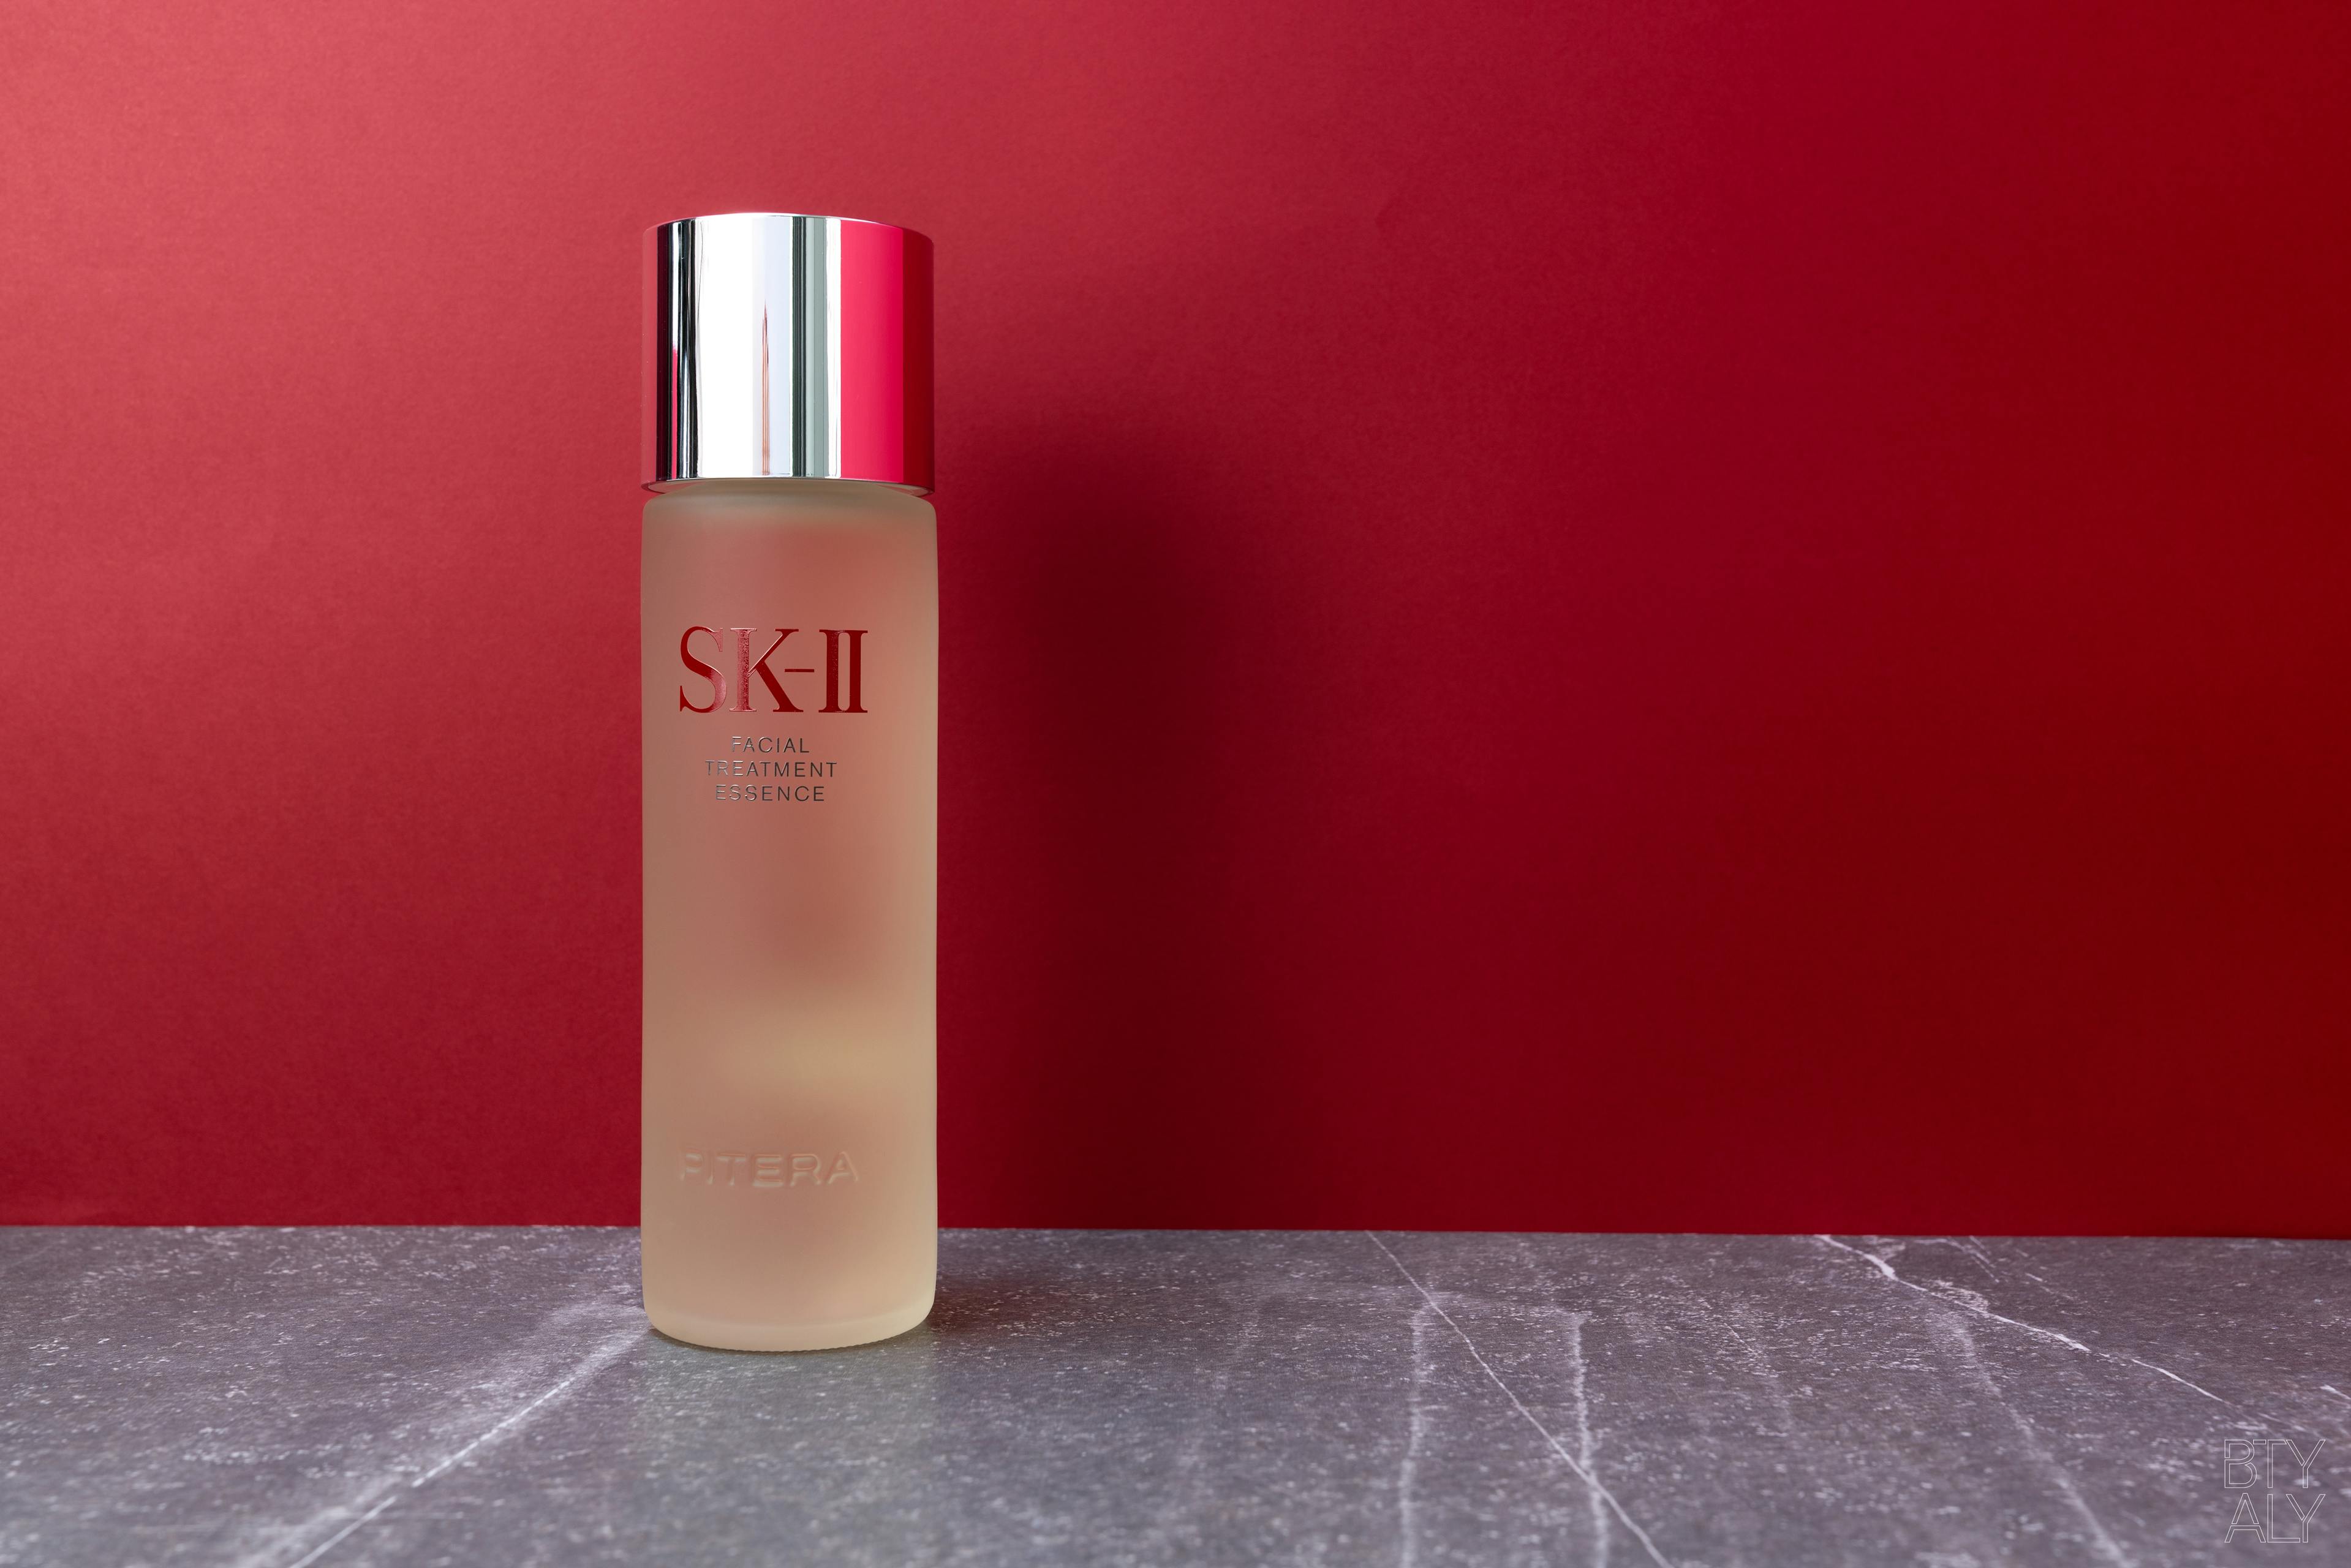 Review Sk Ii Facial Treatment Essence Pitera Bty Aly